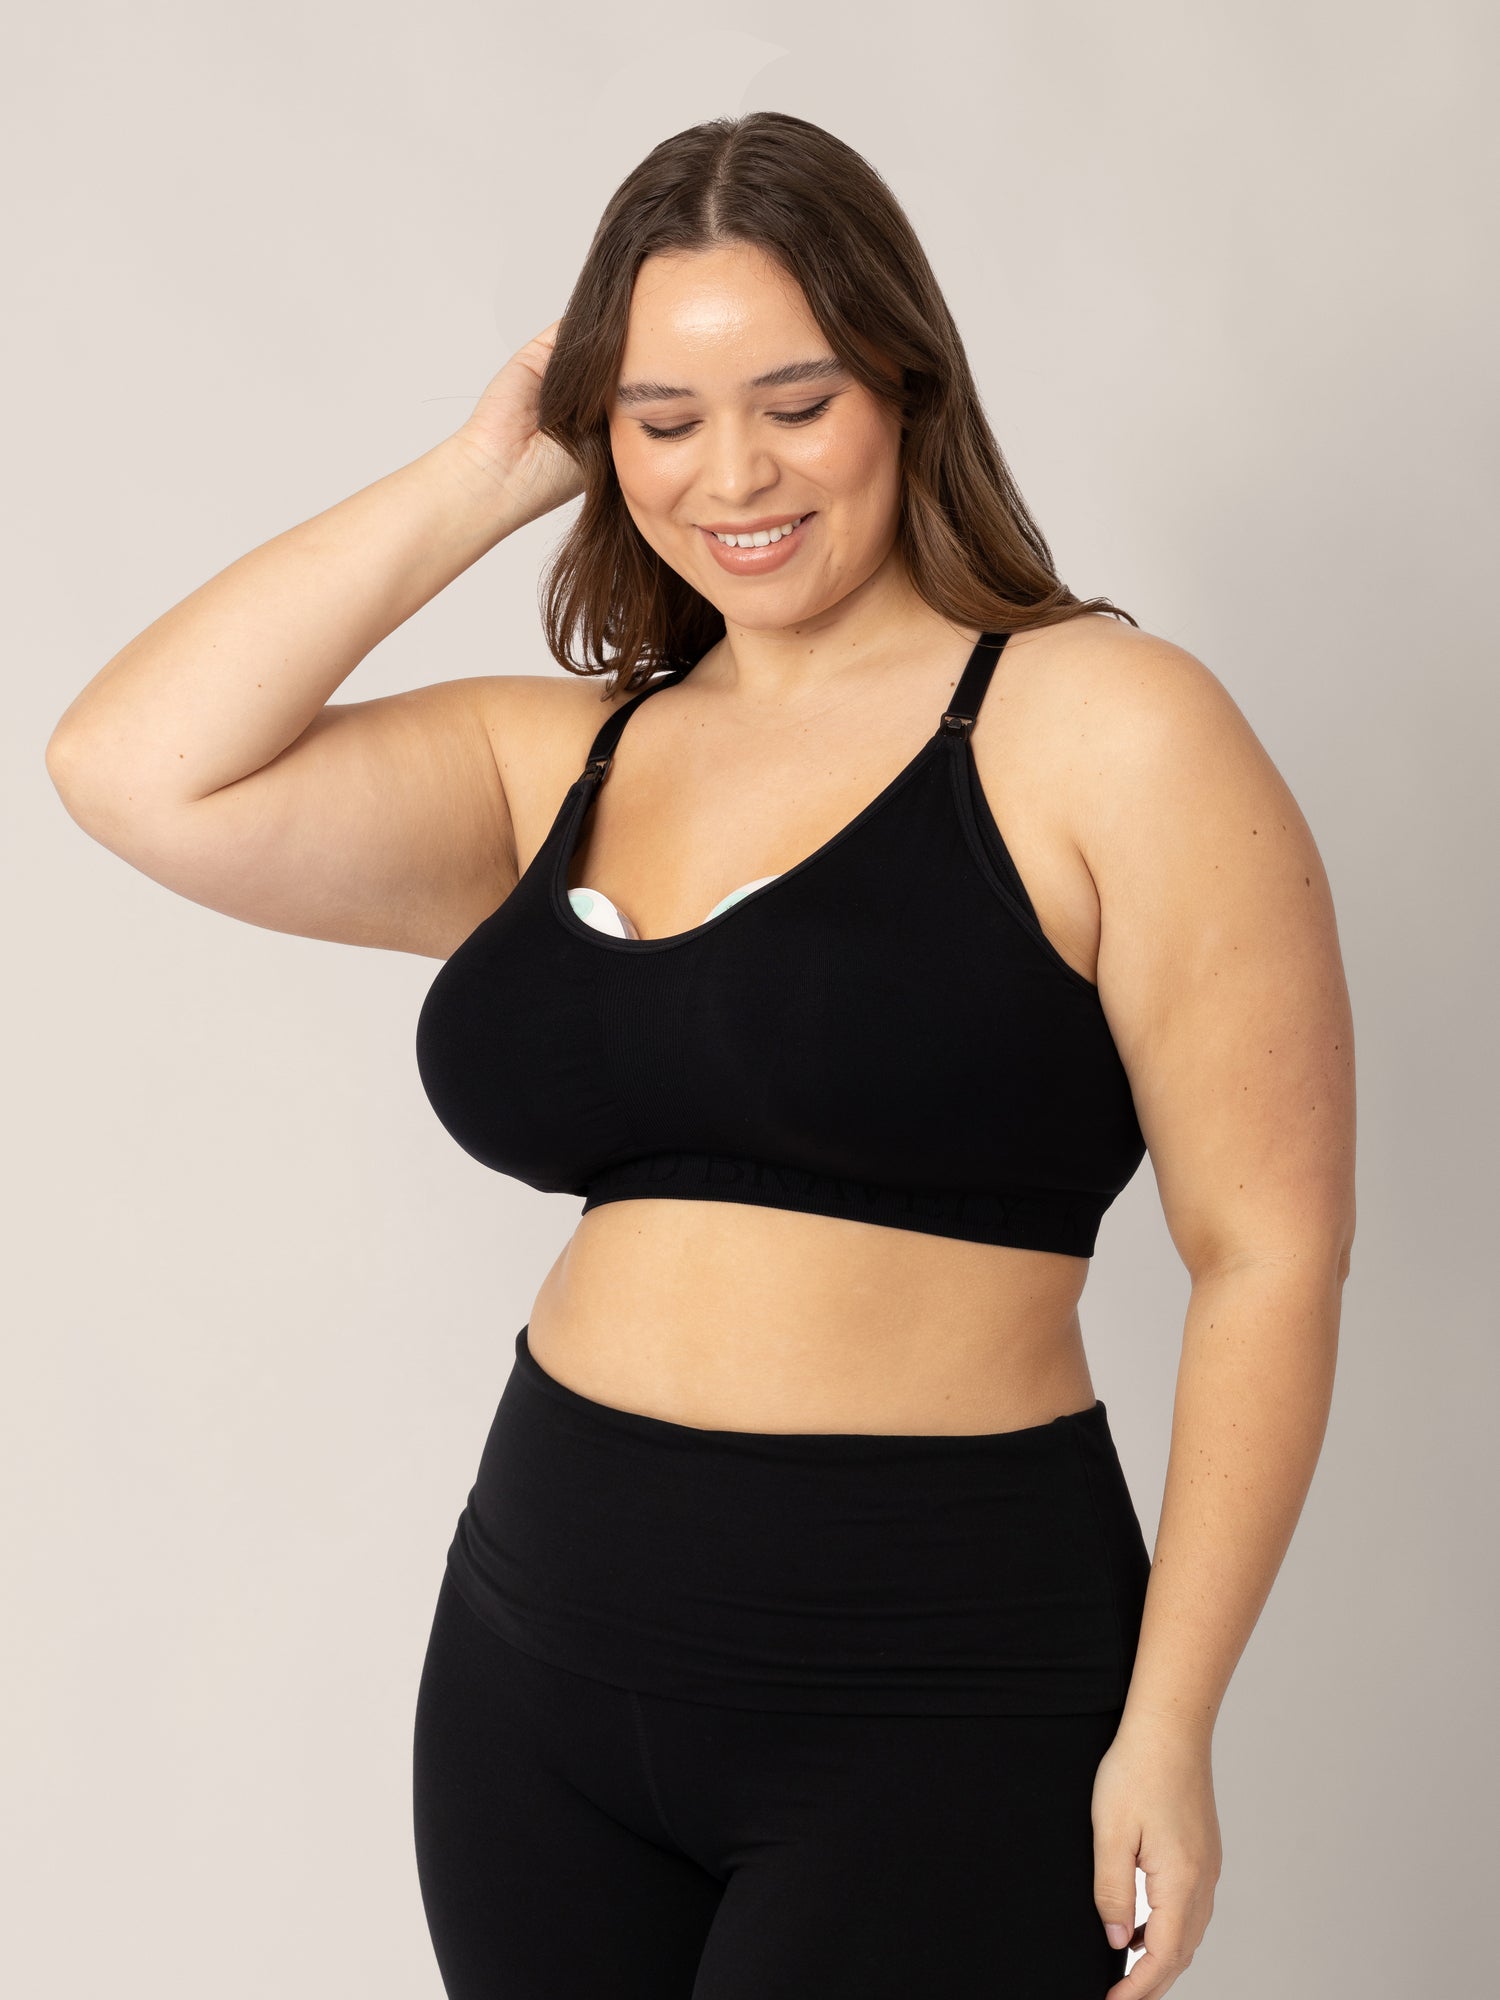 Model with two pumps in her Sublime® Nursing Sports Bra in Black with her hand on her head.